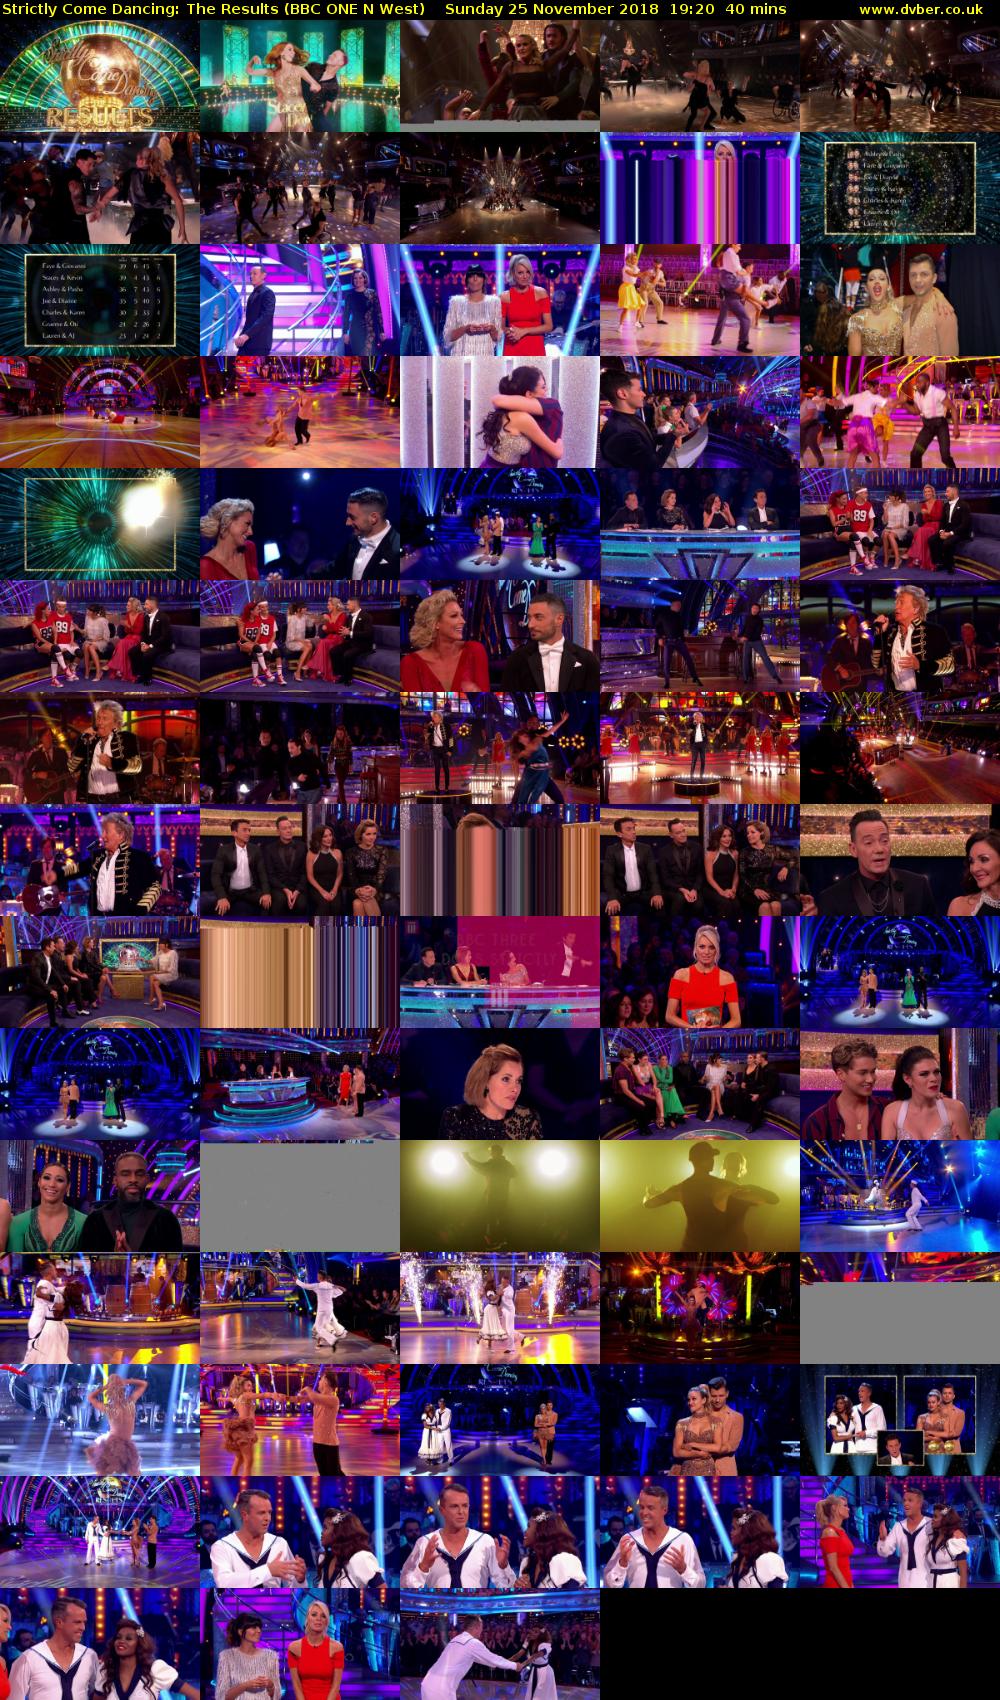 Strictly Come Dancing: The Results (BBC ONE N West) Sunday 25 November 2018 19:20 - 20:00